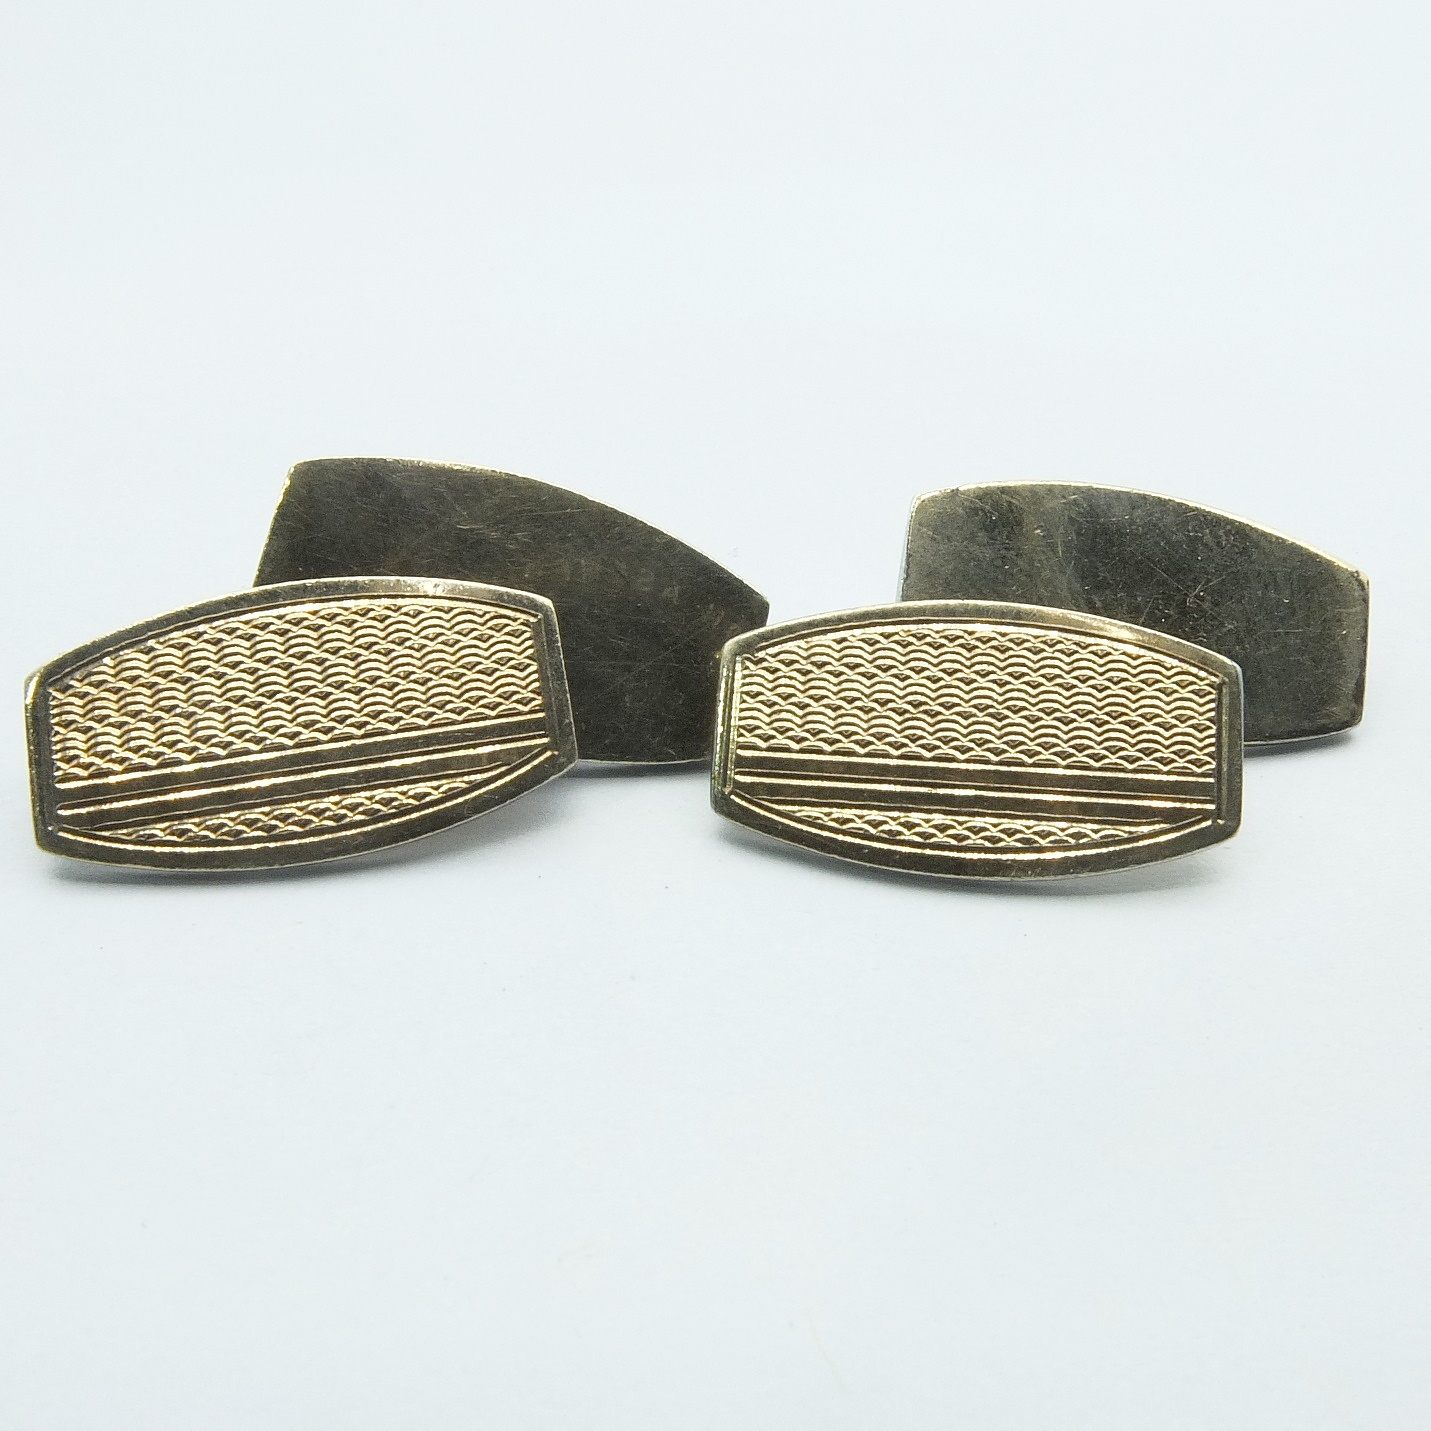 'Sterling Silver Double Cufflinks with Gold Sheet to Top'